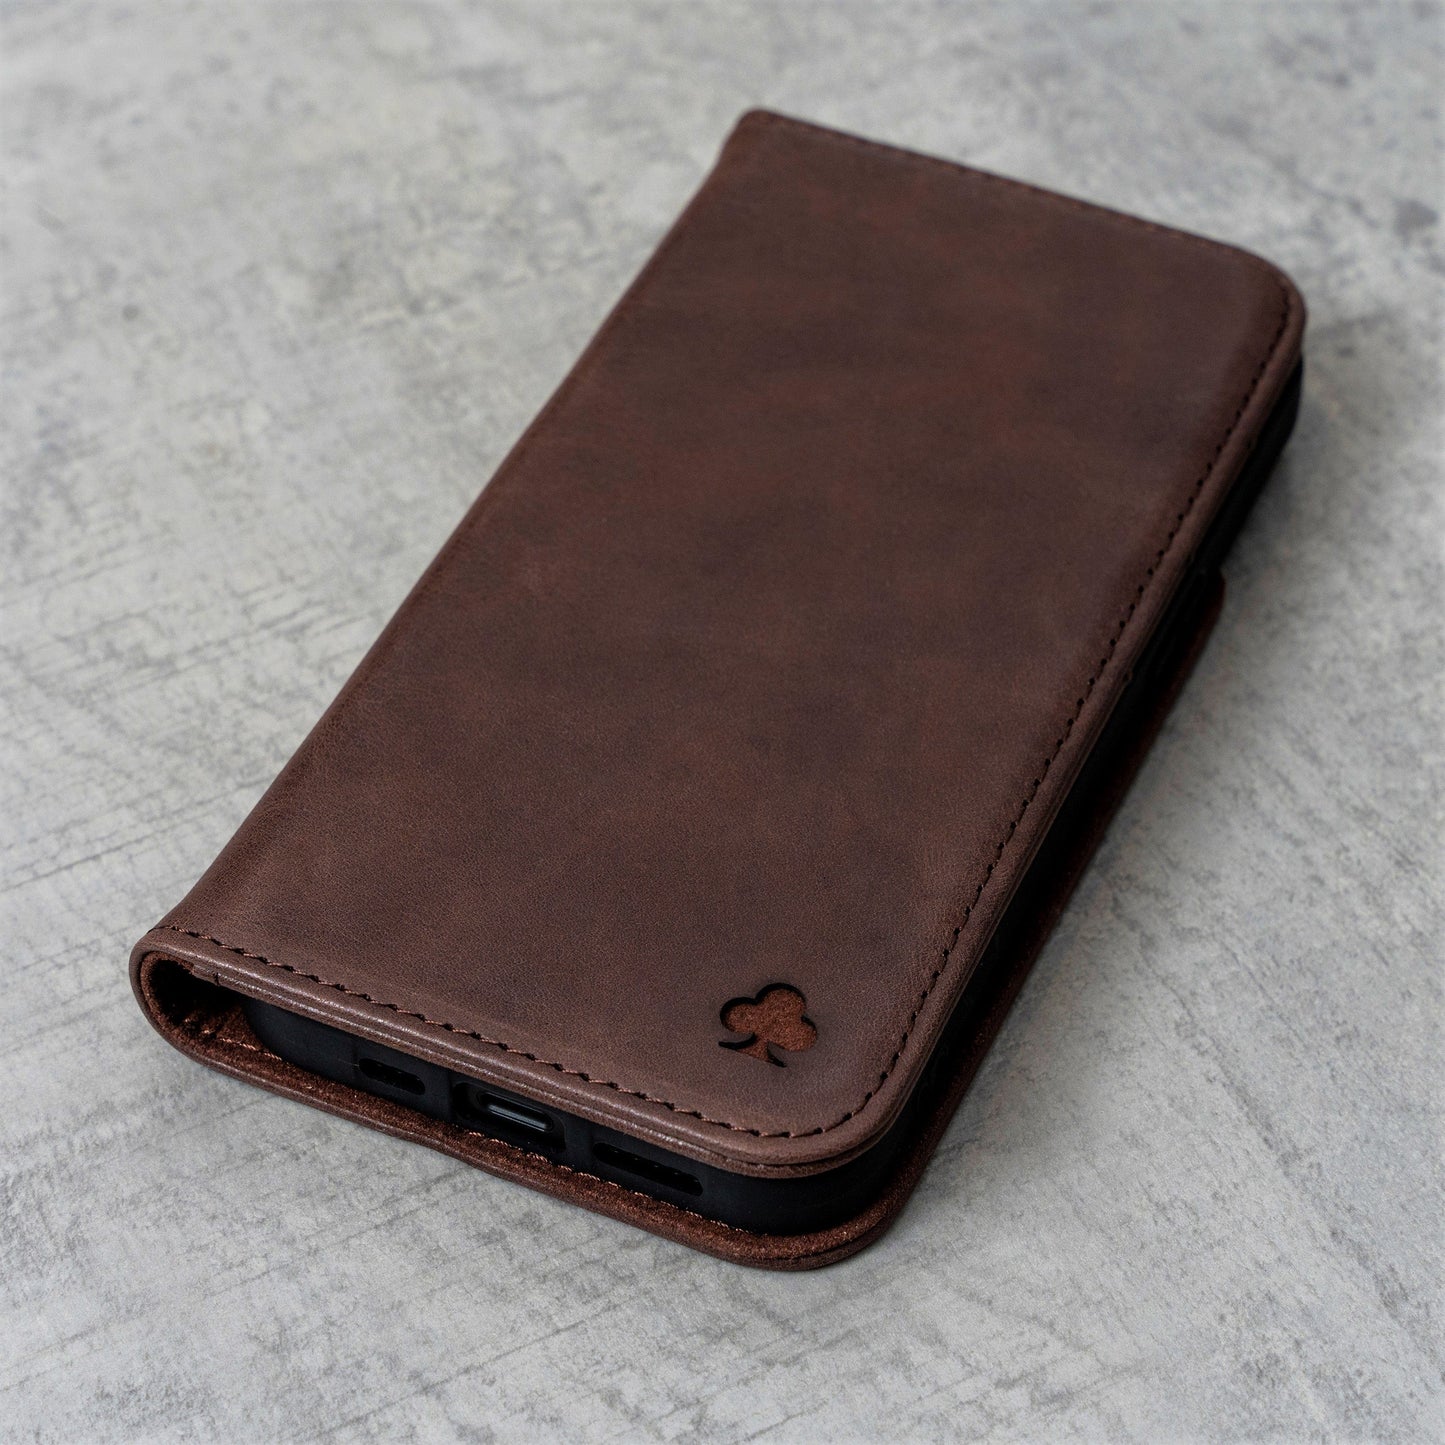 Google Pixel 2 Leather Case. Premium Slim Genuine Leather Stand Case/Cover/Wallet (Chocolate Brown)